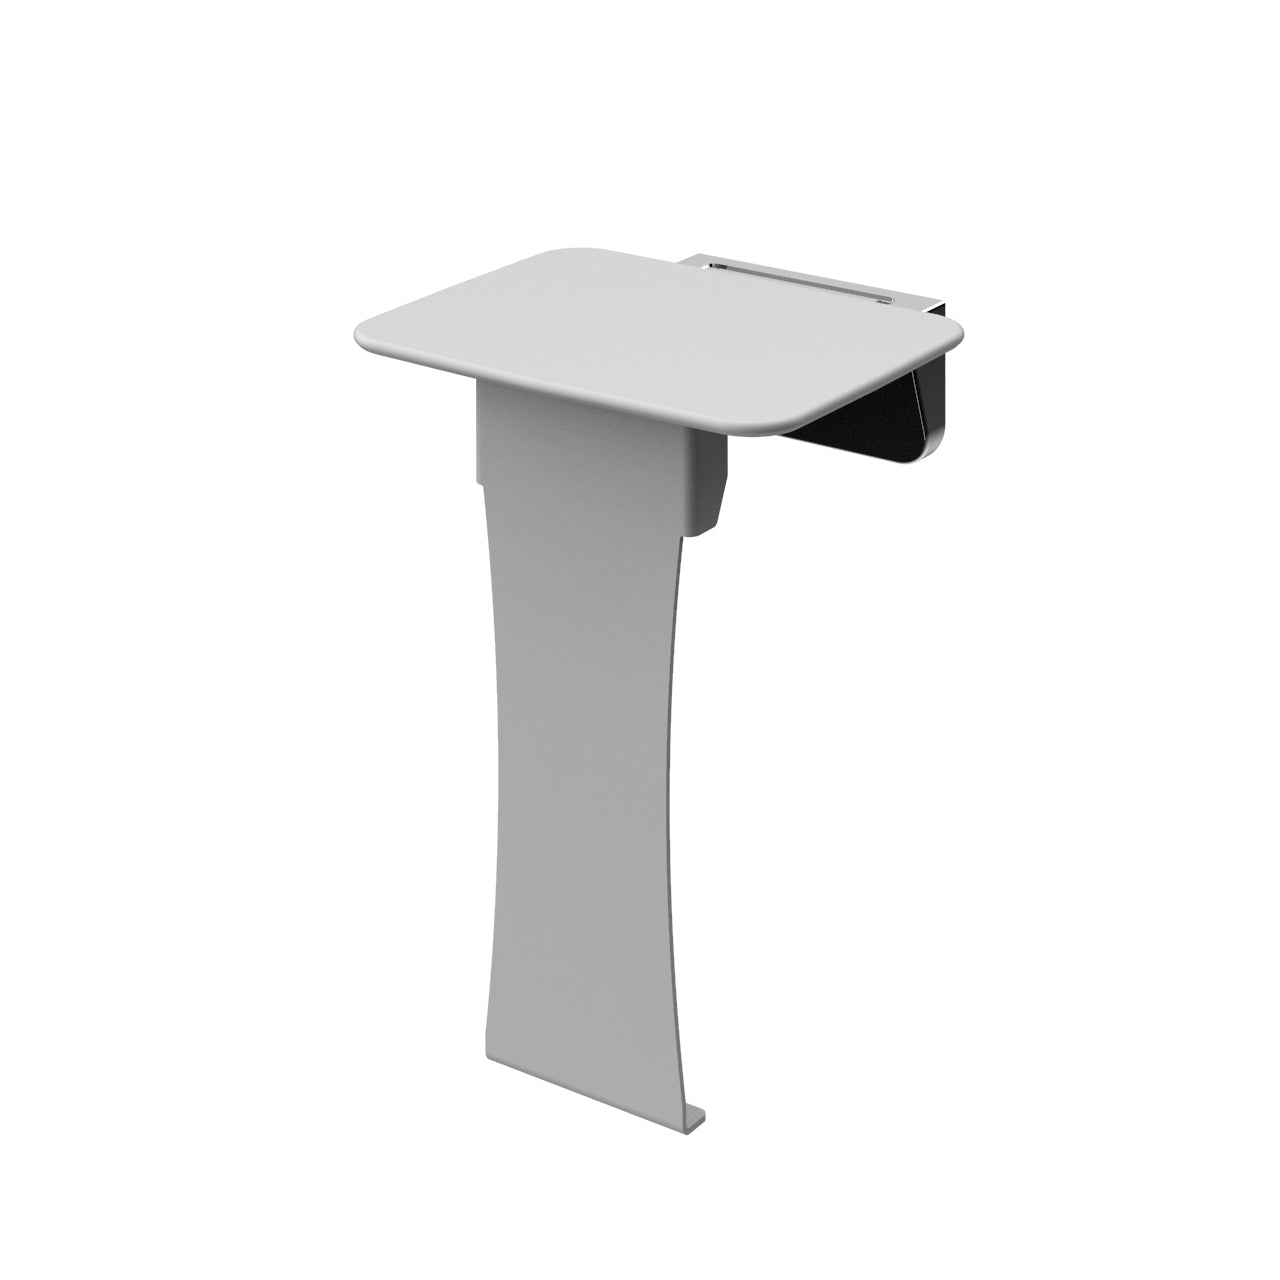 Liberty Shower Seat 350 Wide White with fold down leg Chrome